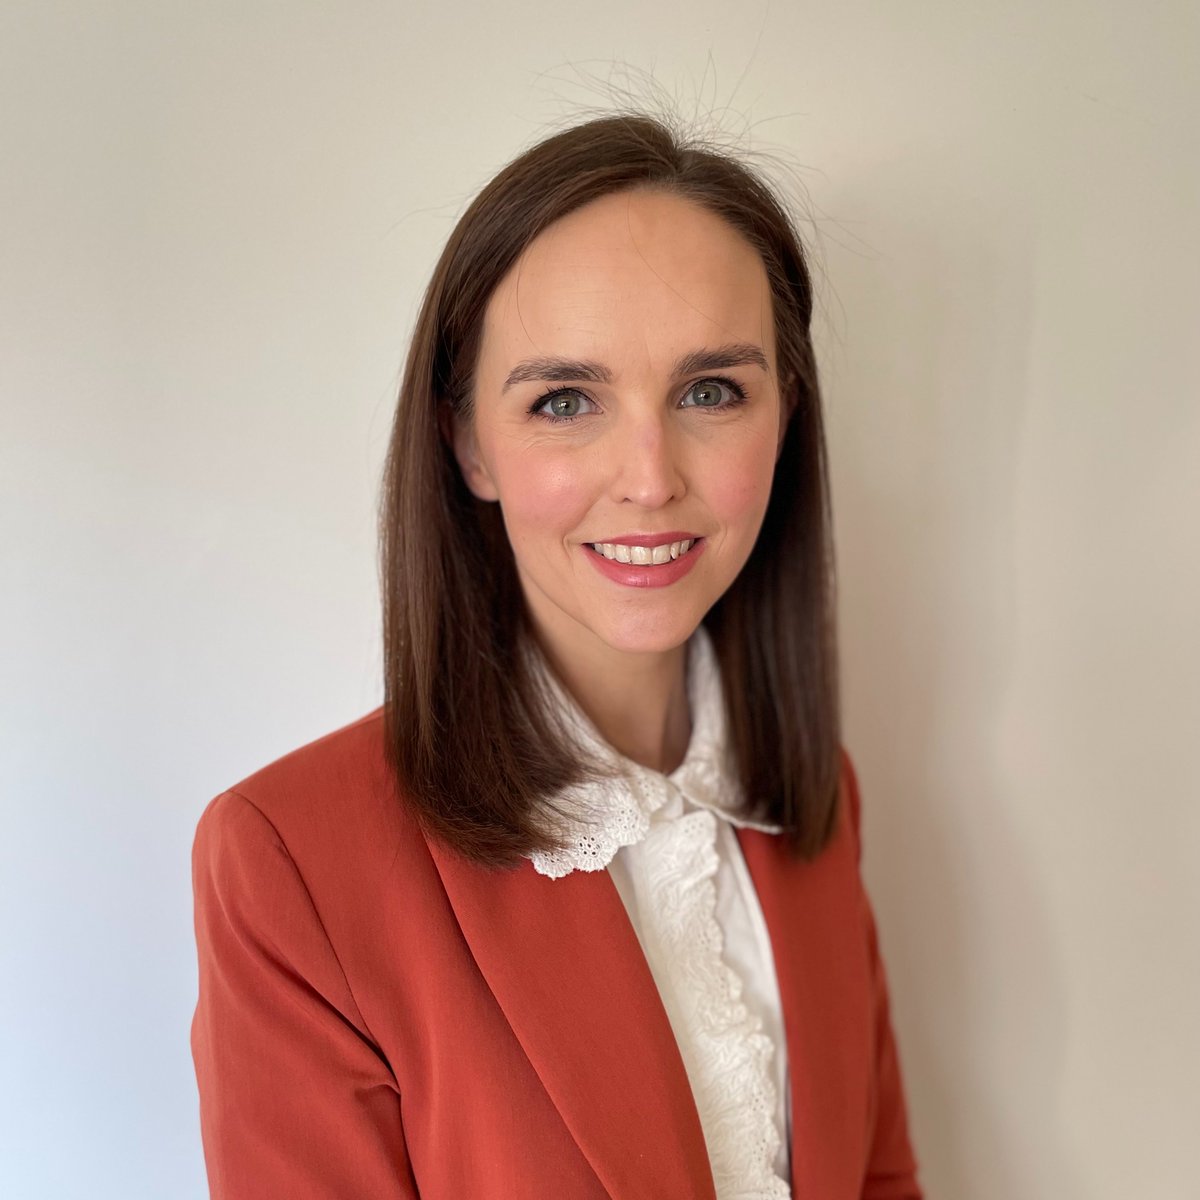 #SundayWiMIN23 Week 21: Dr Ciara McCarthy, GP in Cork and current ICGP/HSE GP Clinical Lead in Women’s Health. LARC trainer, Early Medical Abortion Trainer, founding member @Startdoctors. Works with @NWIHP to represent the voice of GPs and their patients ➡️bit.ly/SW23Wk21